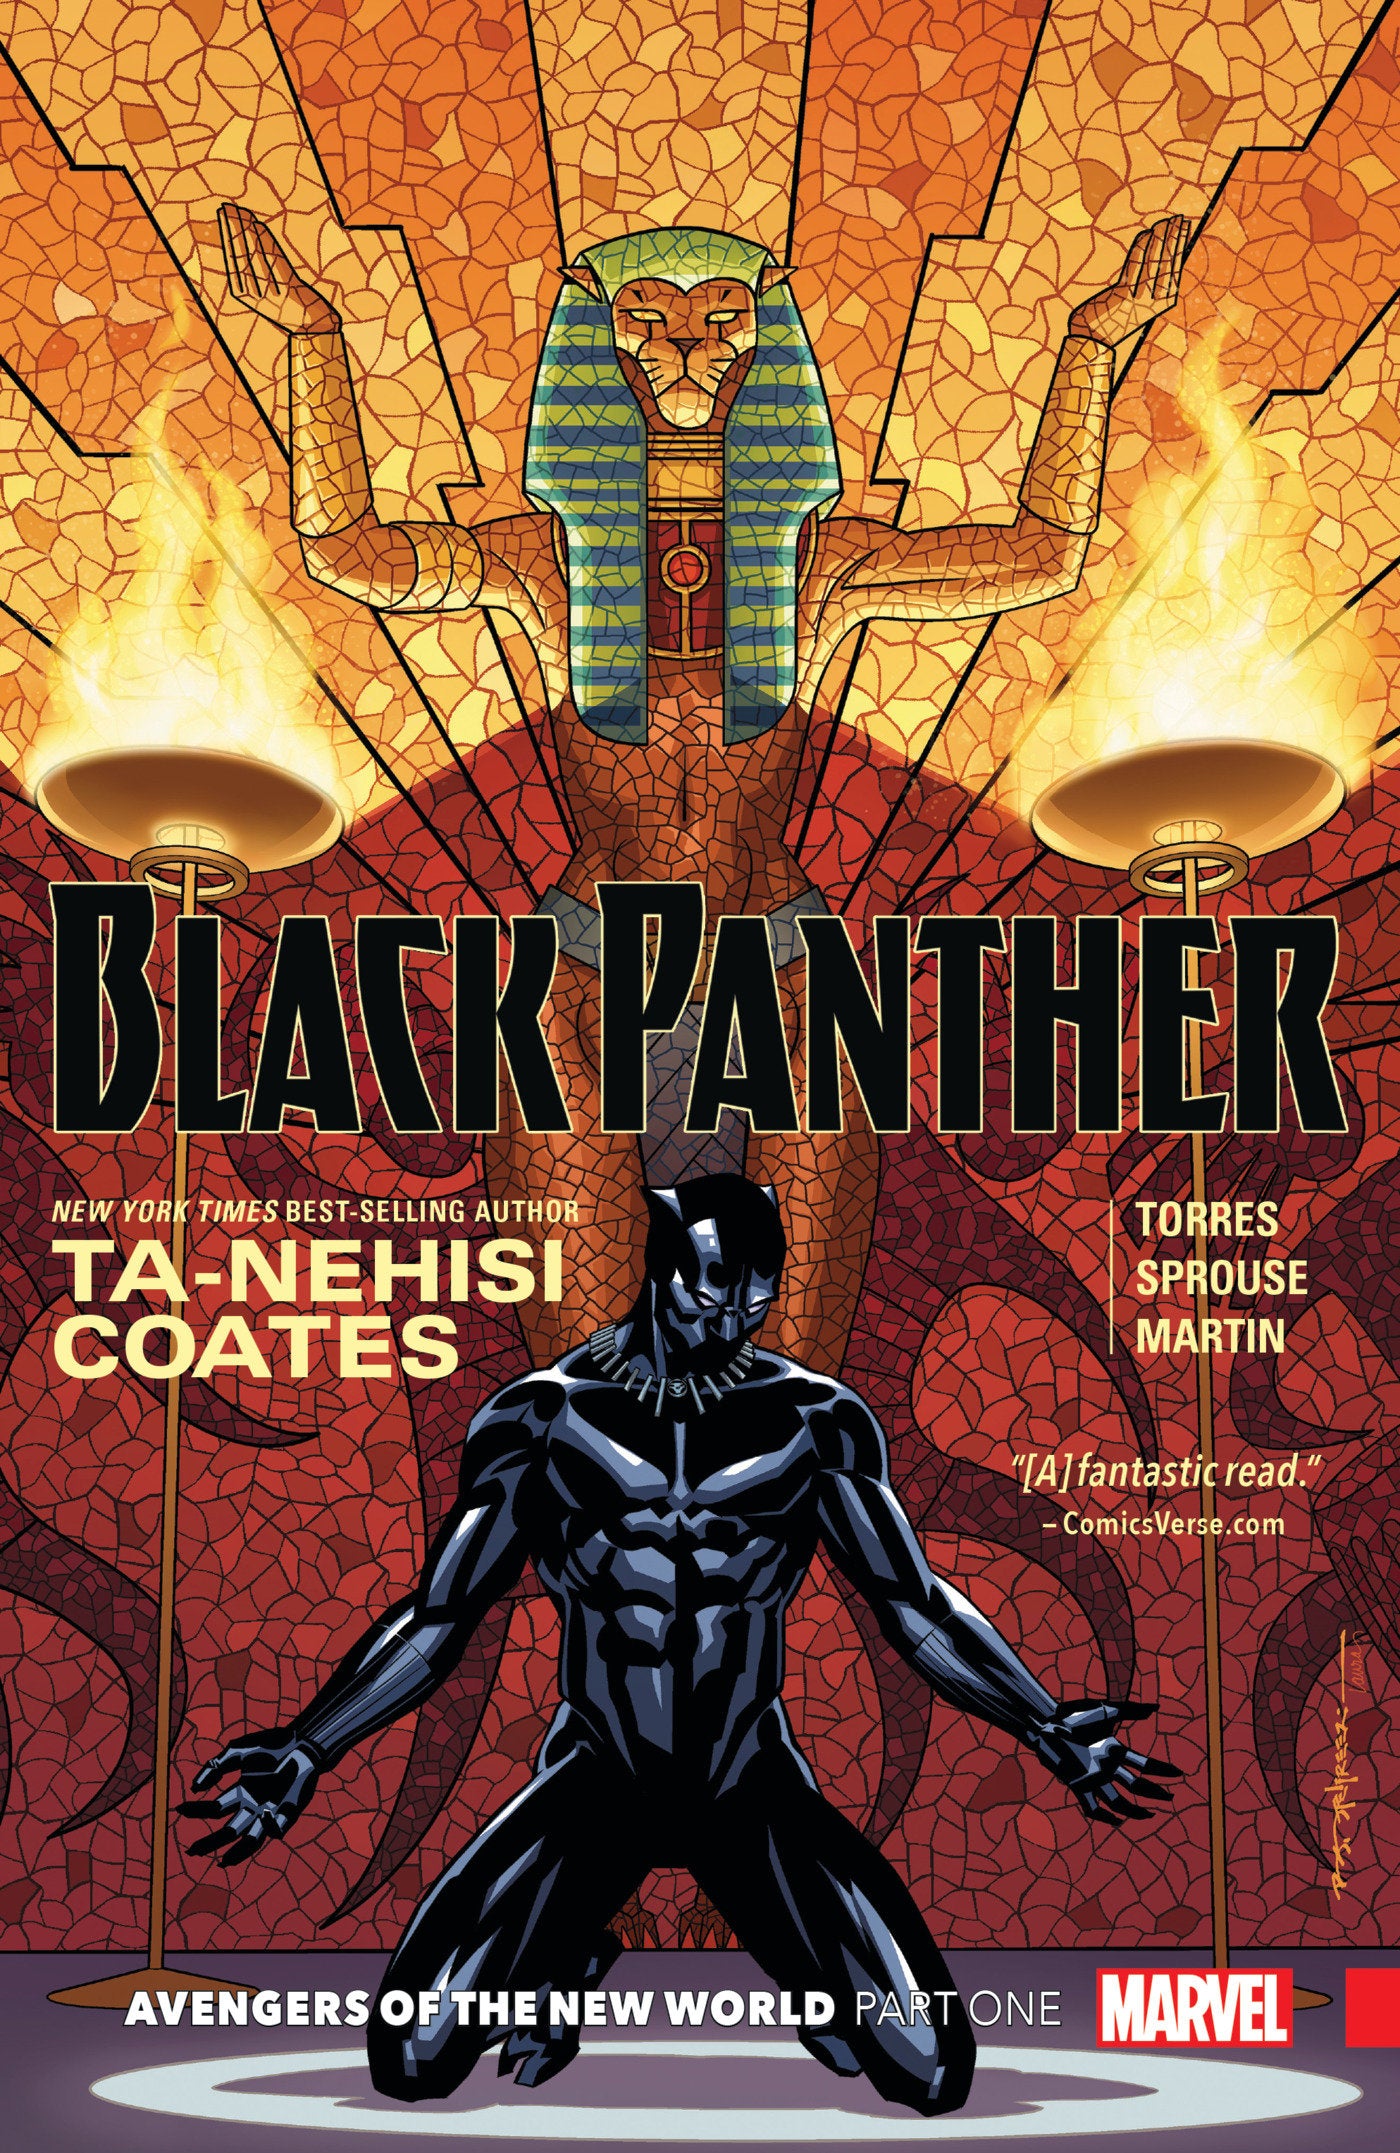 BLACK PANTHER BOOK 4: AVENGERS OF THE NEW WORLD PART 1 TRADE PAPERBACK